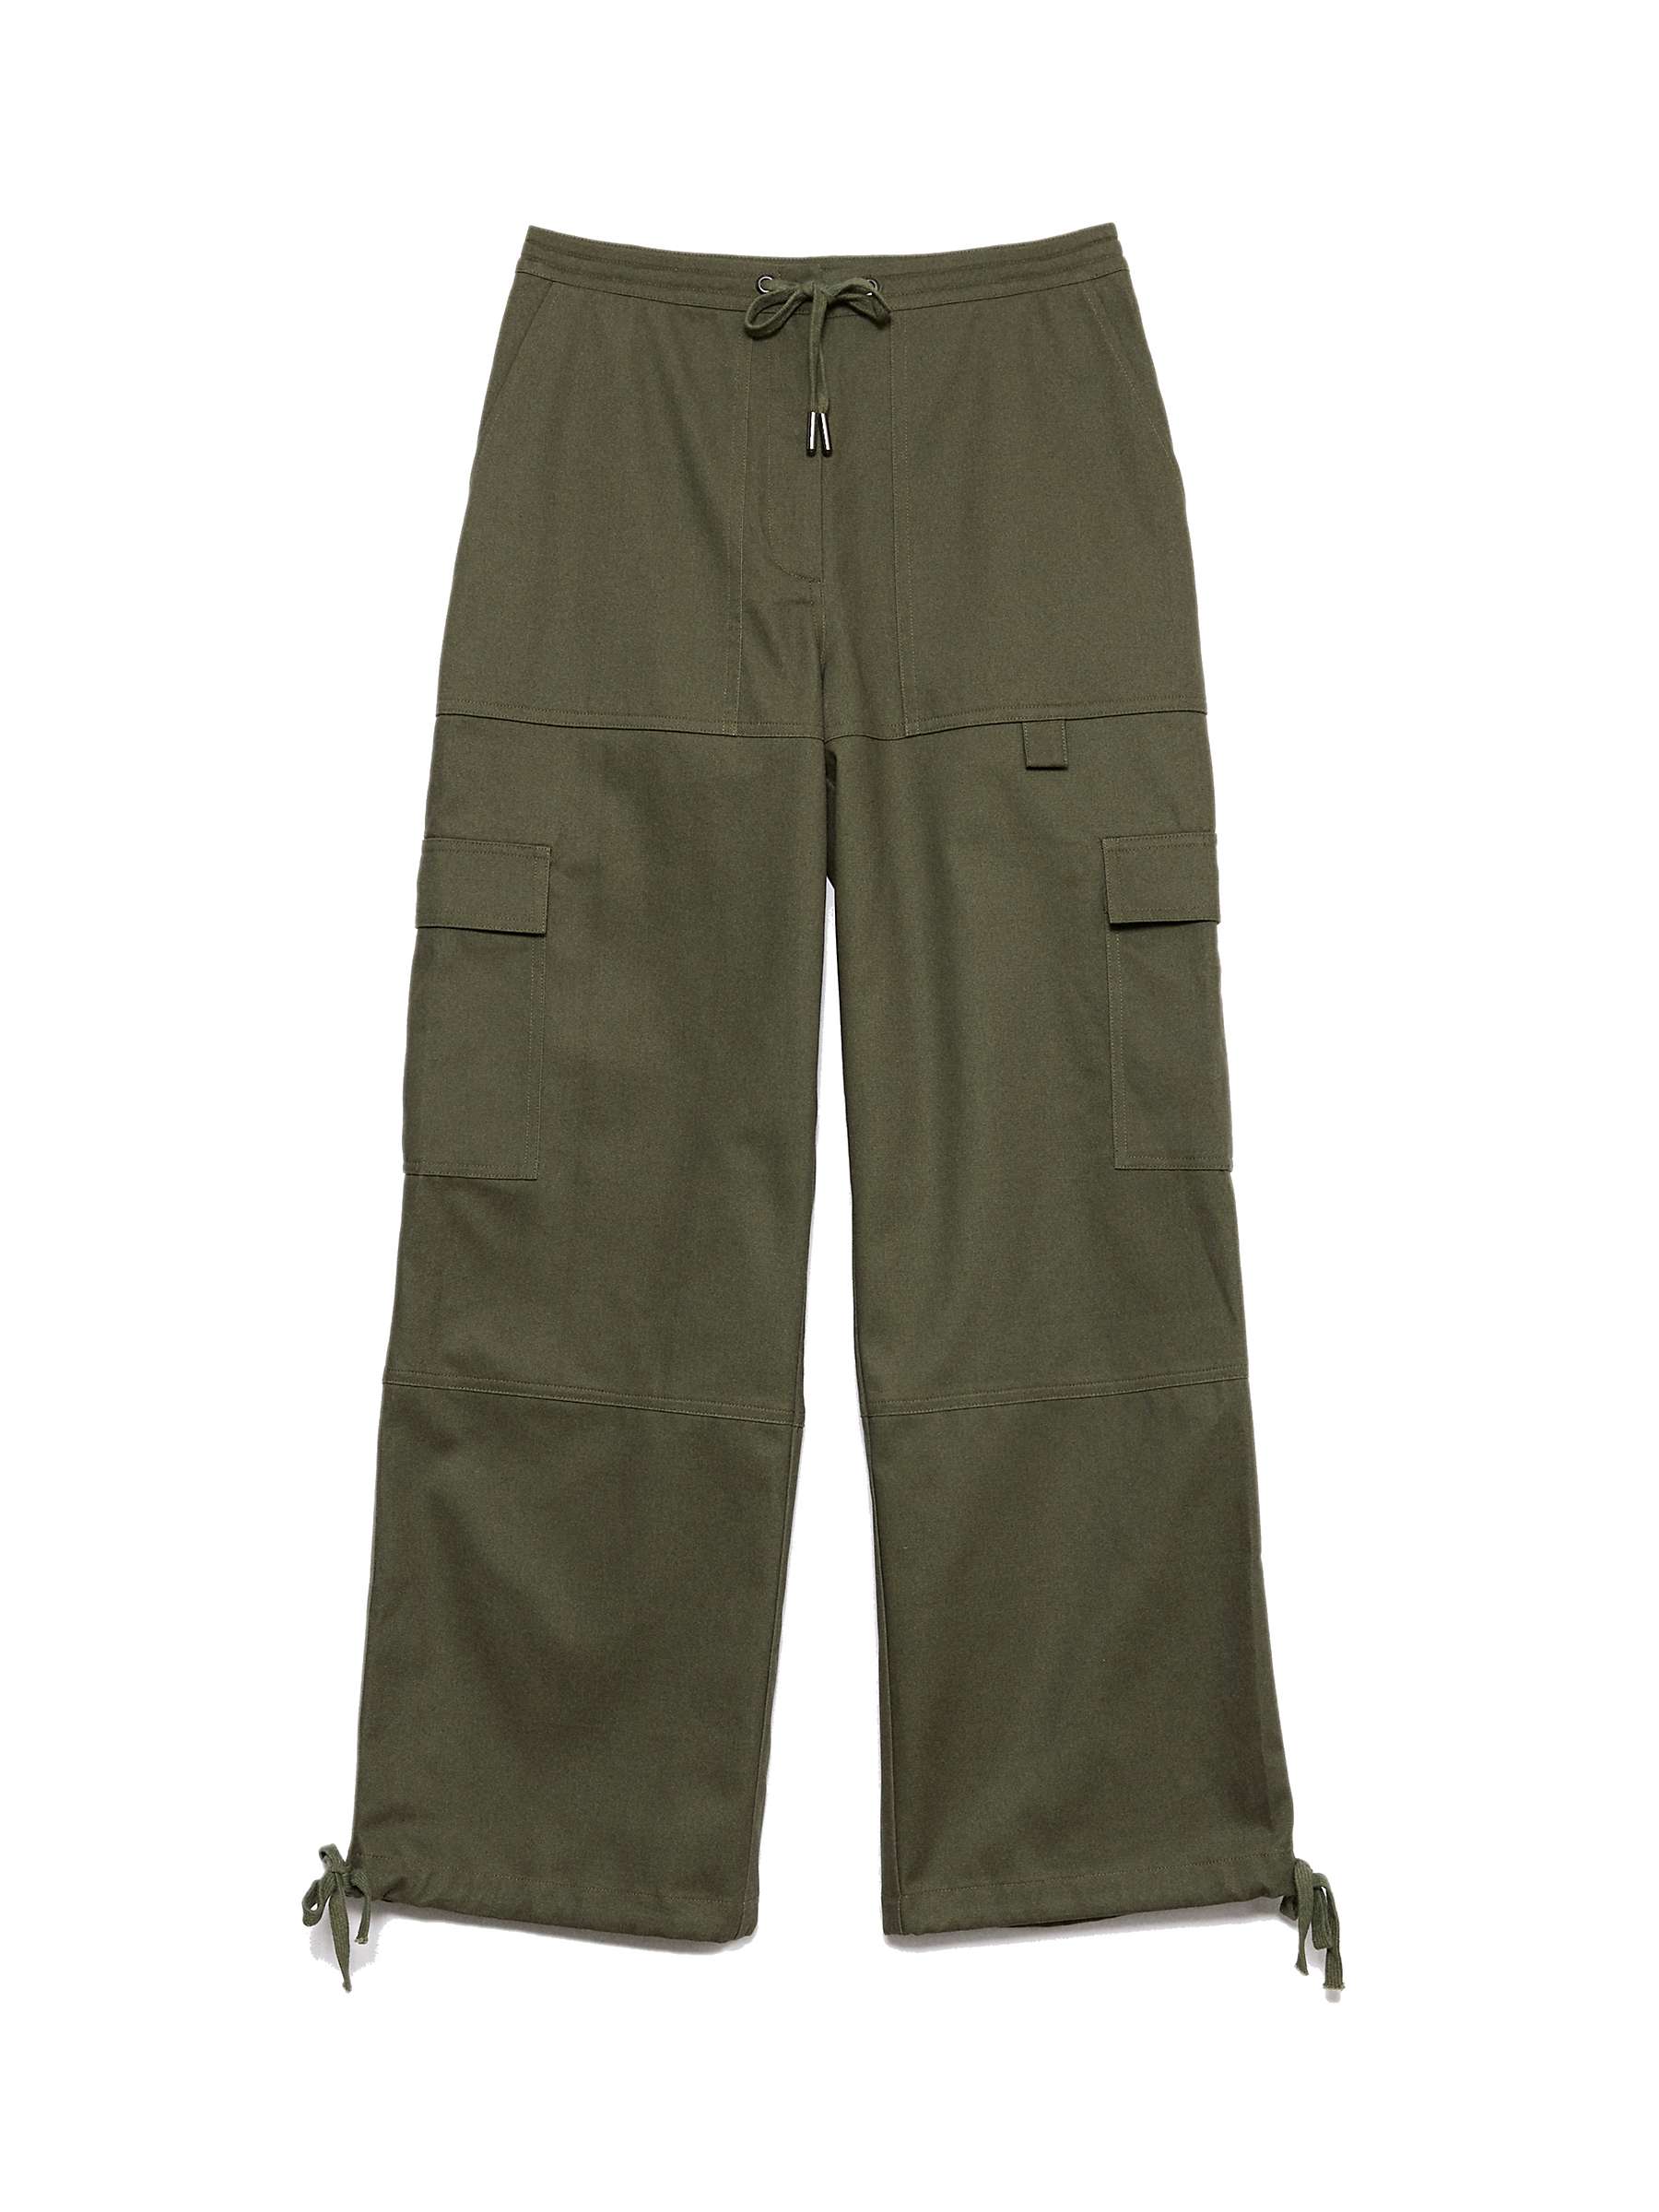 Buy Albaray Cotton Twill Utility Trousers, Olive Online at johnlewis.com